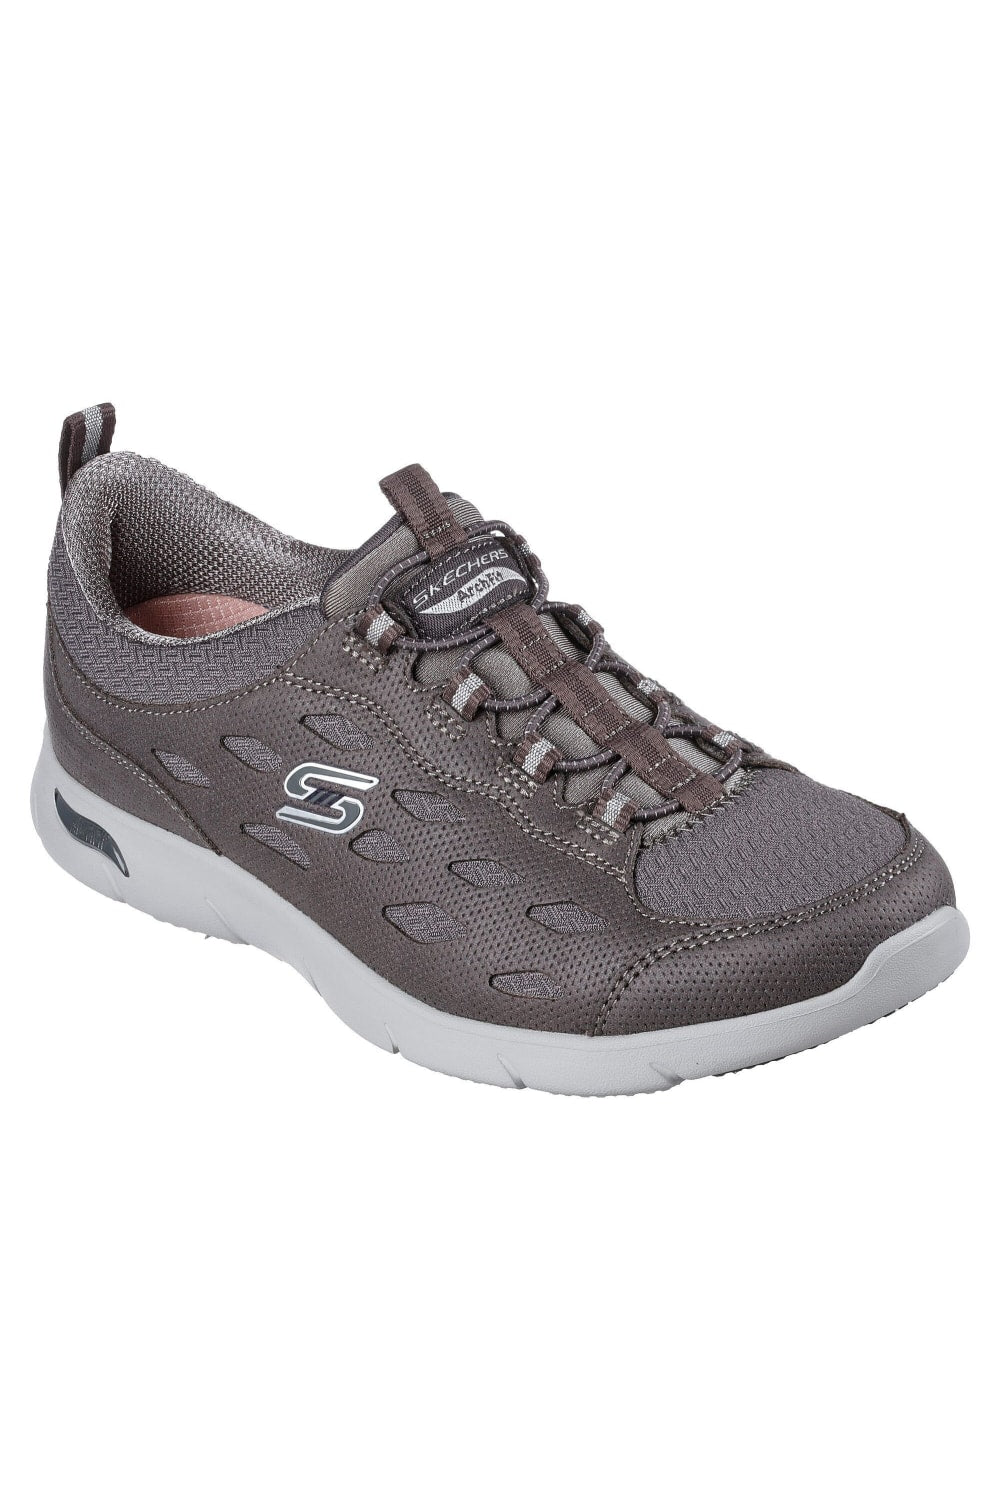 Womens/Ladies Arch Fit Refine Sneakers - Charcoal